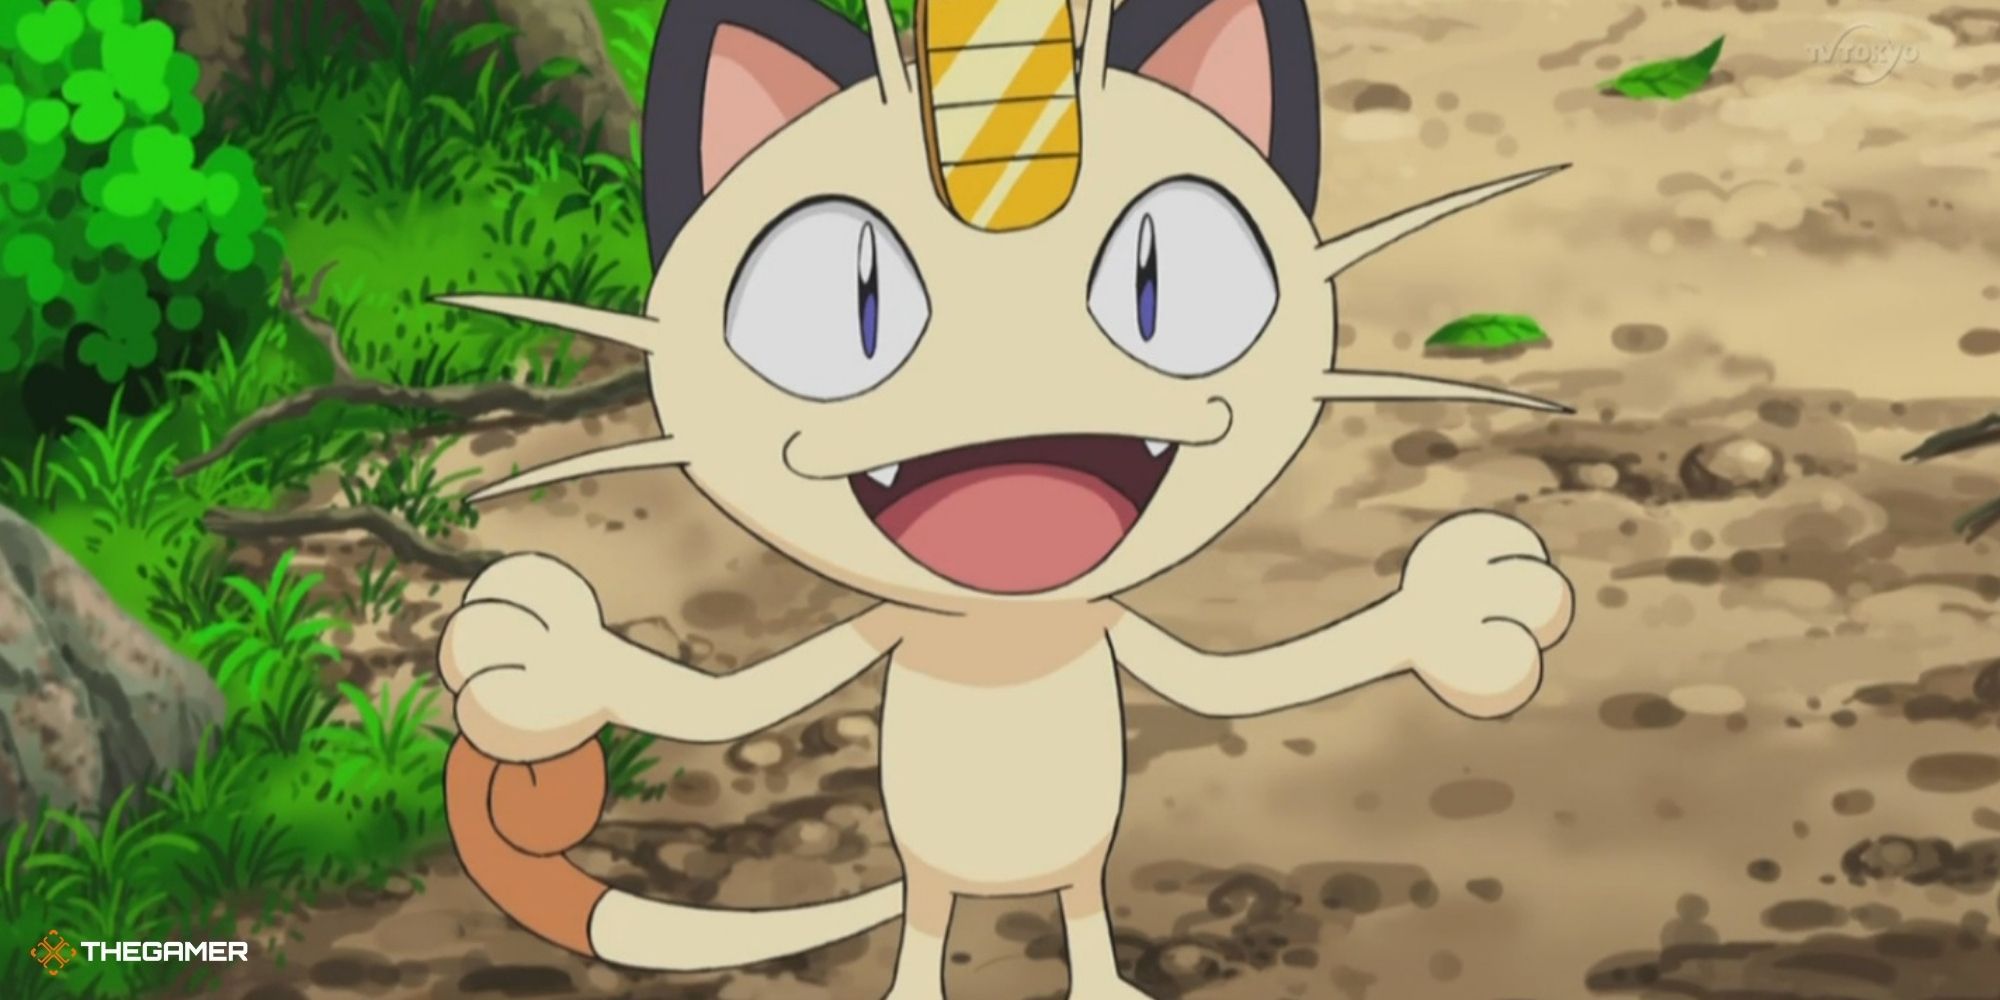 Meowth smiling and holding its arms wide in the Pokemon anime